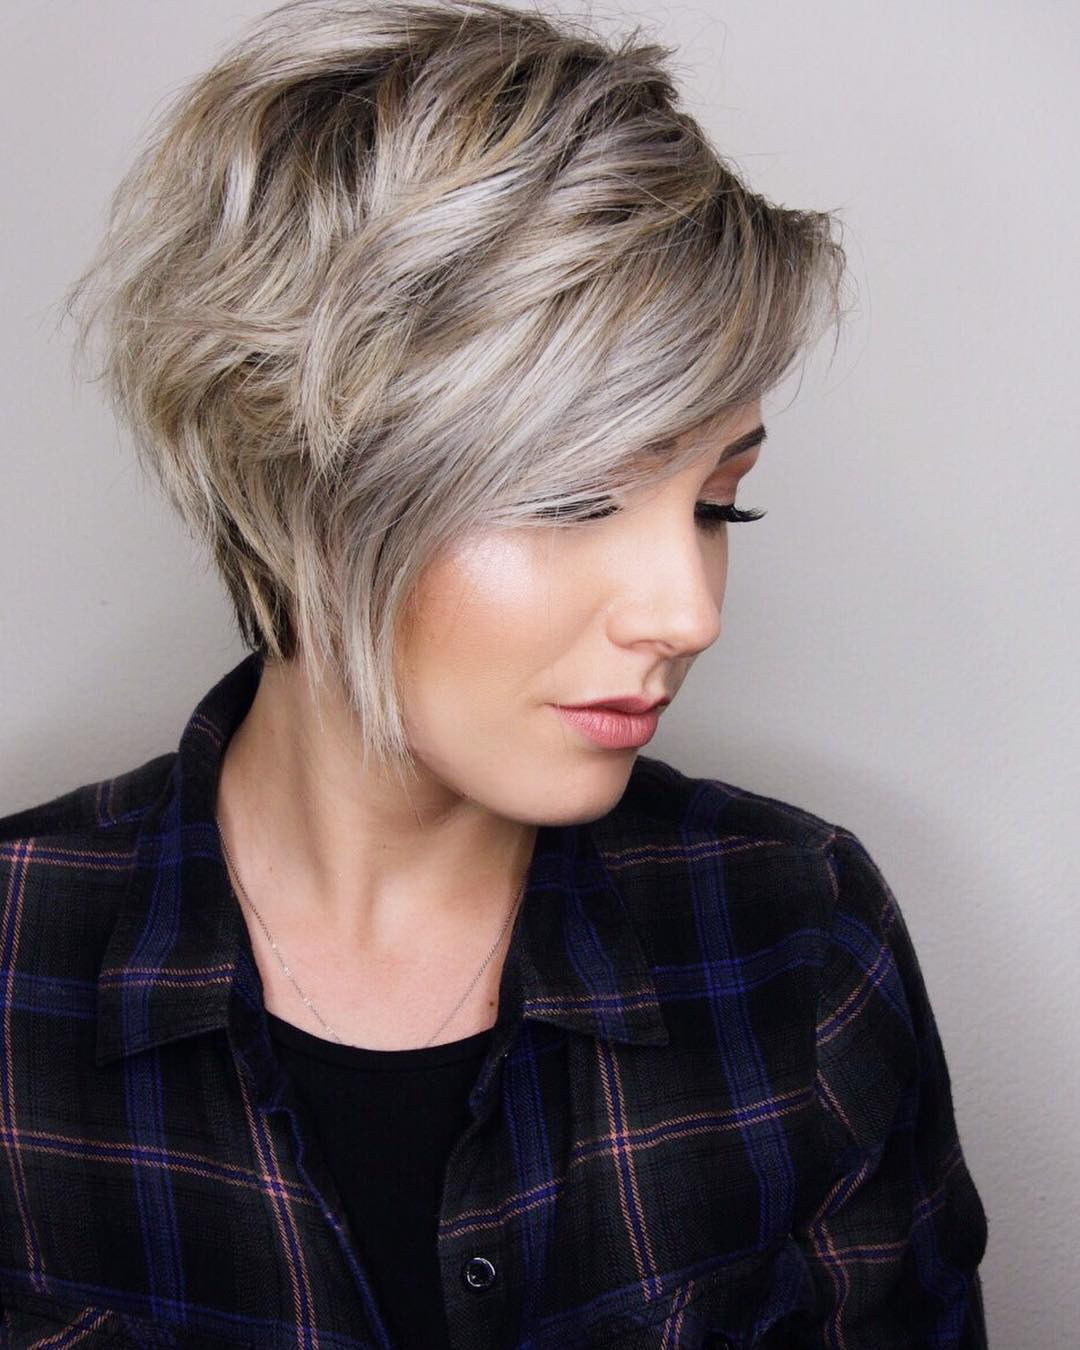 Layered Short Hairstyles
 10 Trendy Layered Short Haircut Ideas 2020 Extra